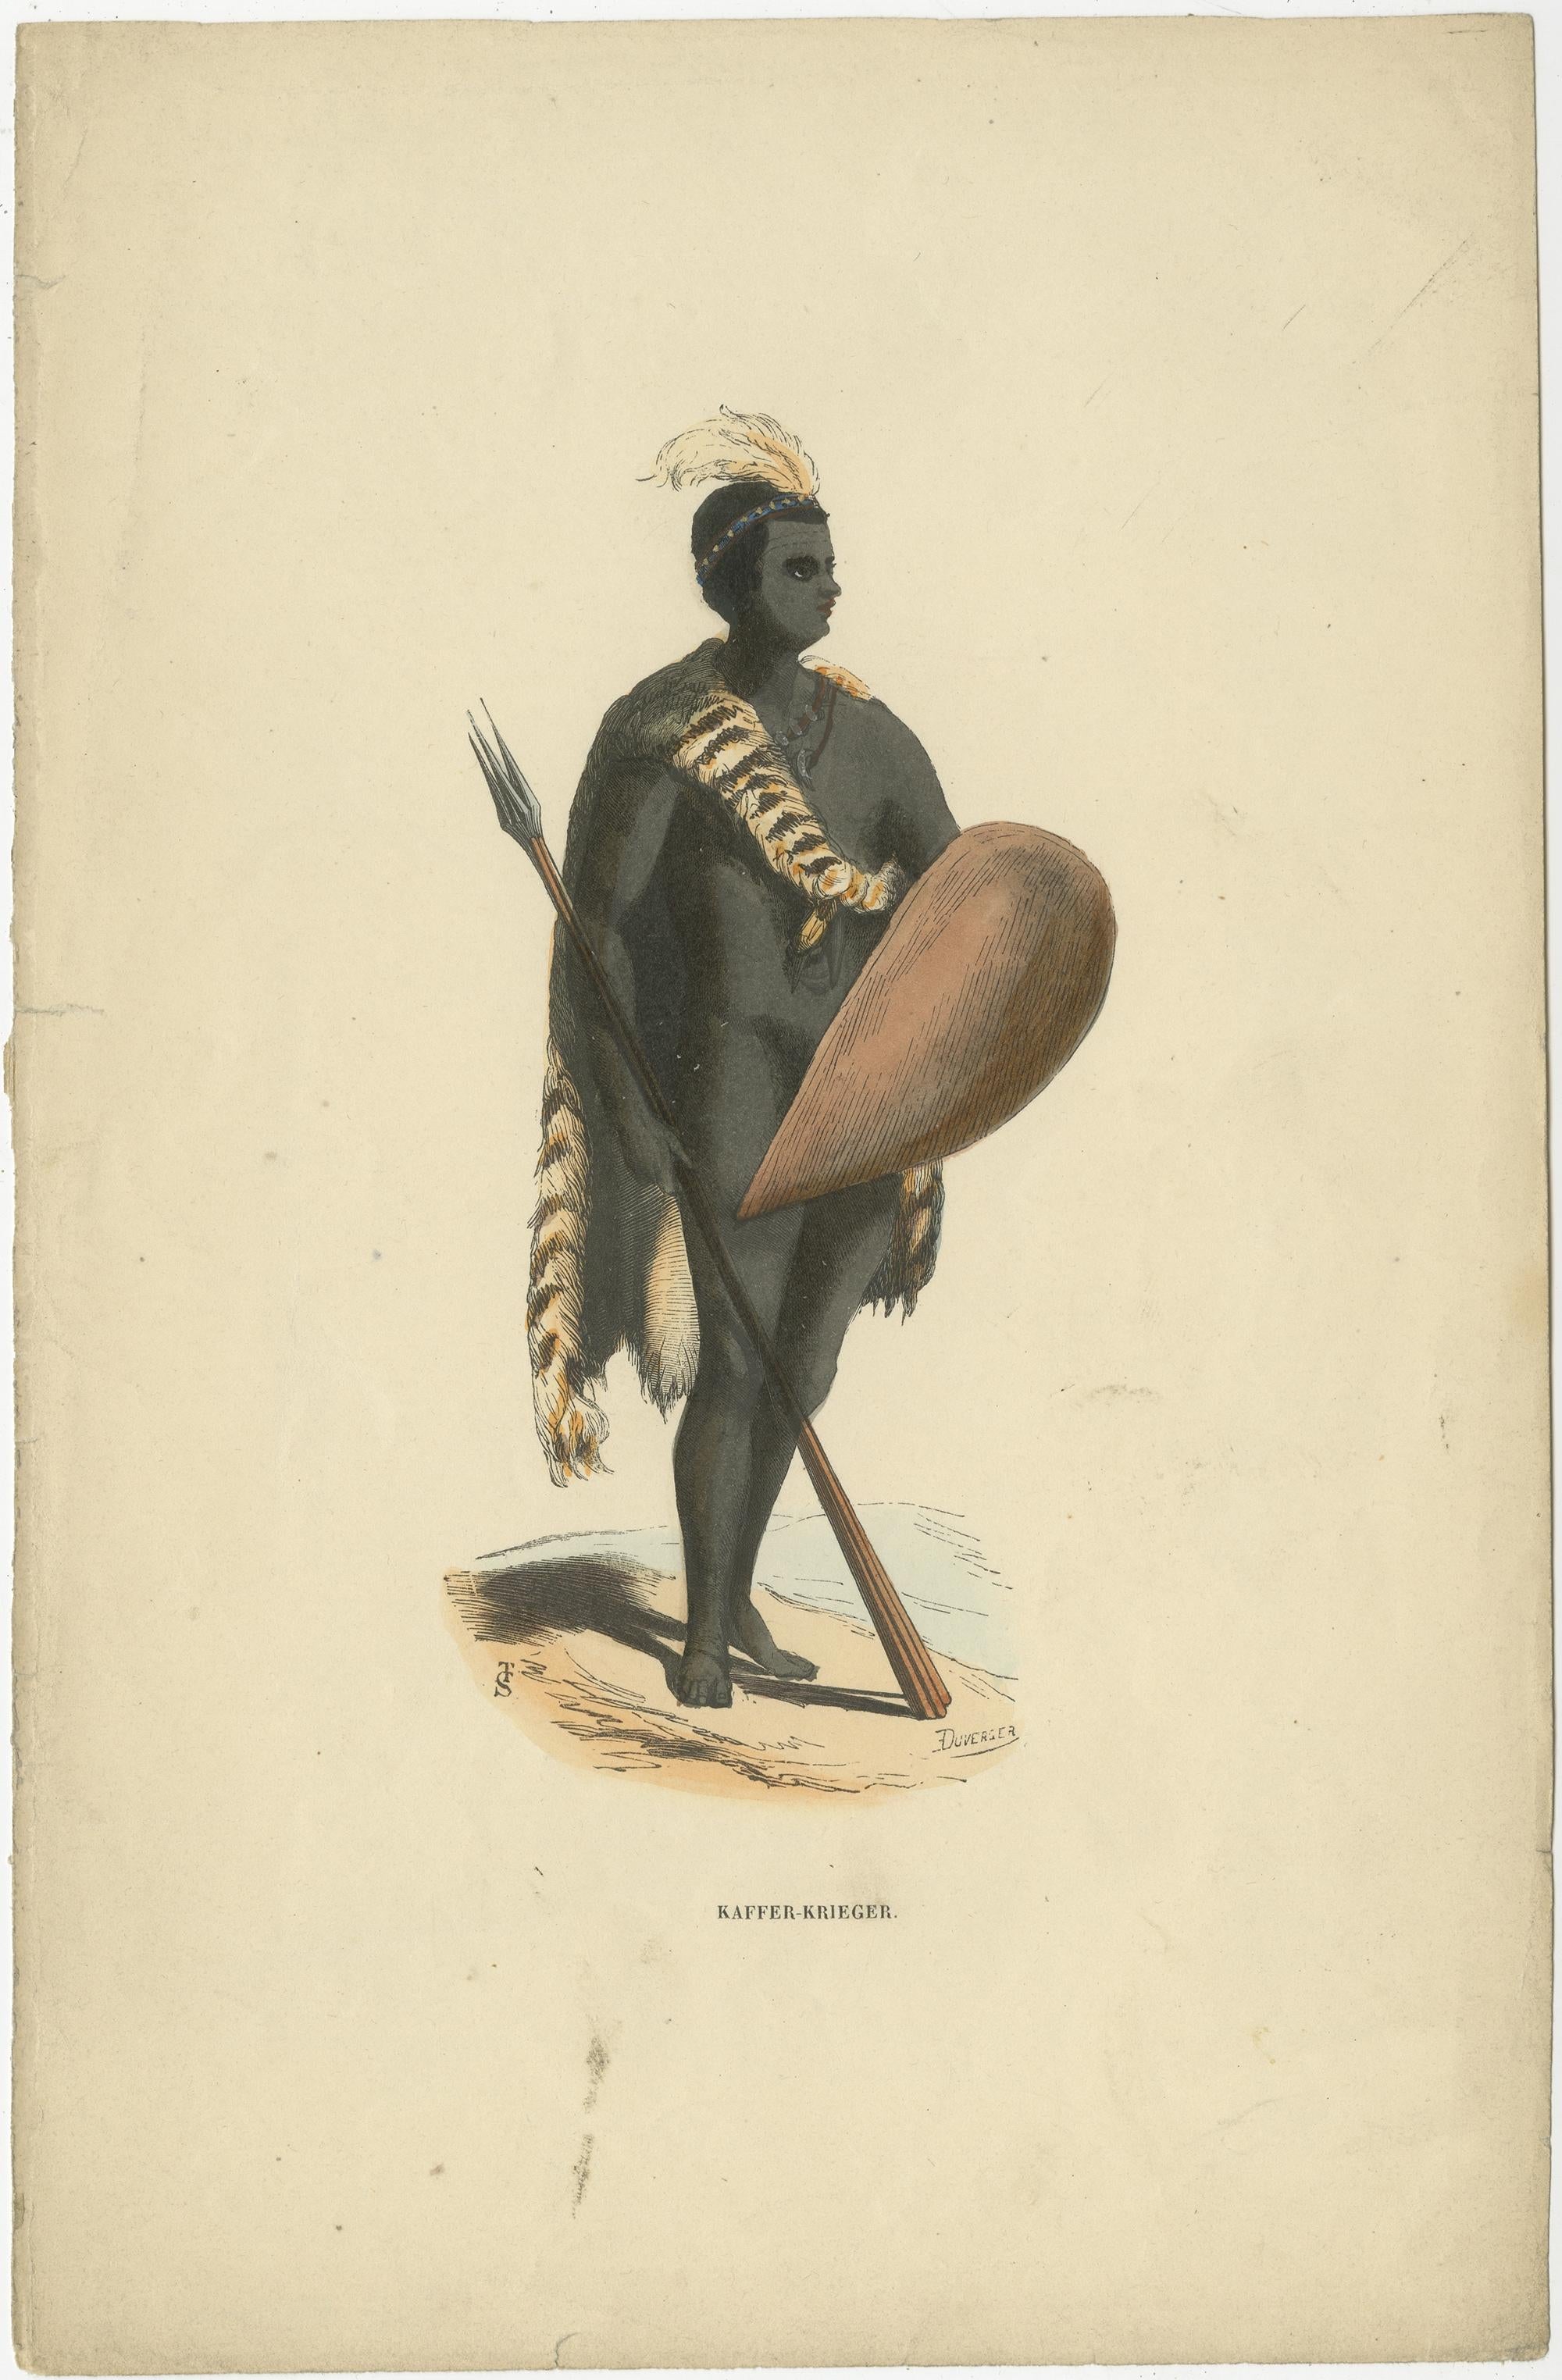 Antique print titled 'Kaffer-Krieger'. 

Original antique print of an African warrior. This print originates from 'Die Volker des Erdballs (..)' by H. Berghaus. 

Artists and engravers: Berghaus was a professor at Berlin and Potsdam who